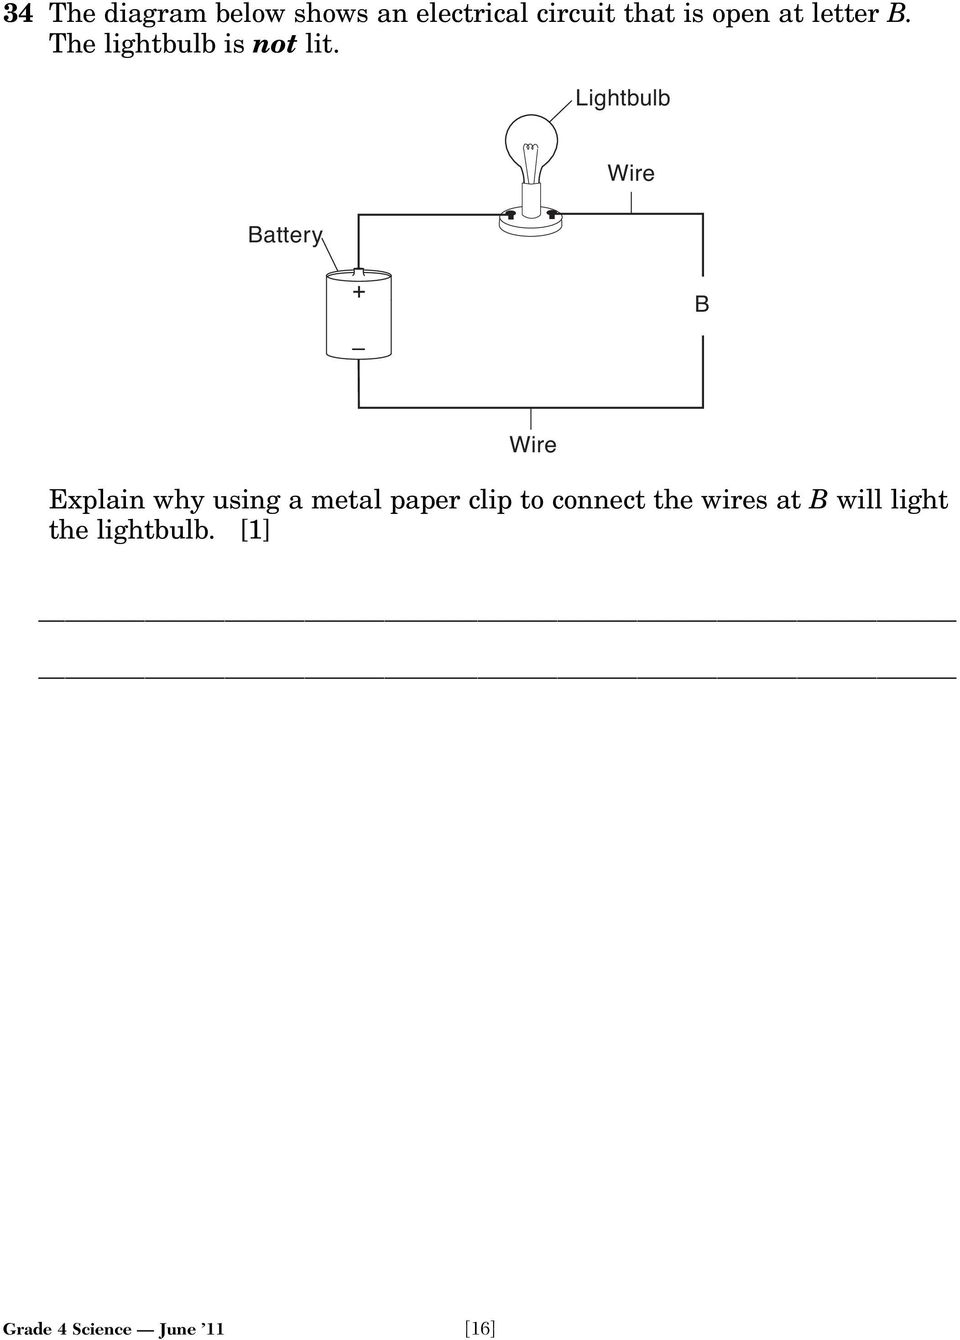 Lightbulb Battery Wire + B Wire Explain why using a metal paper